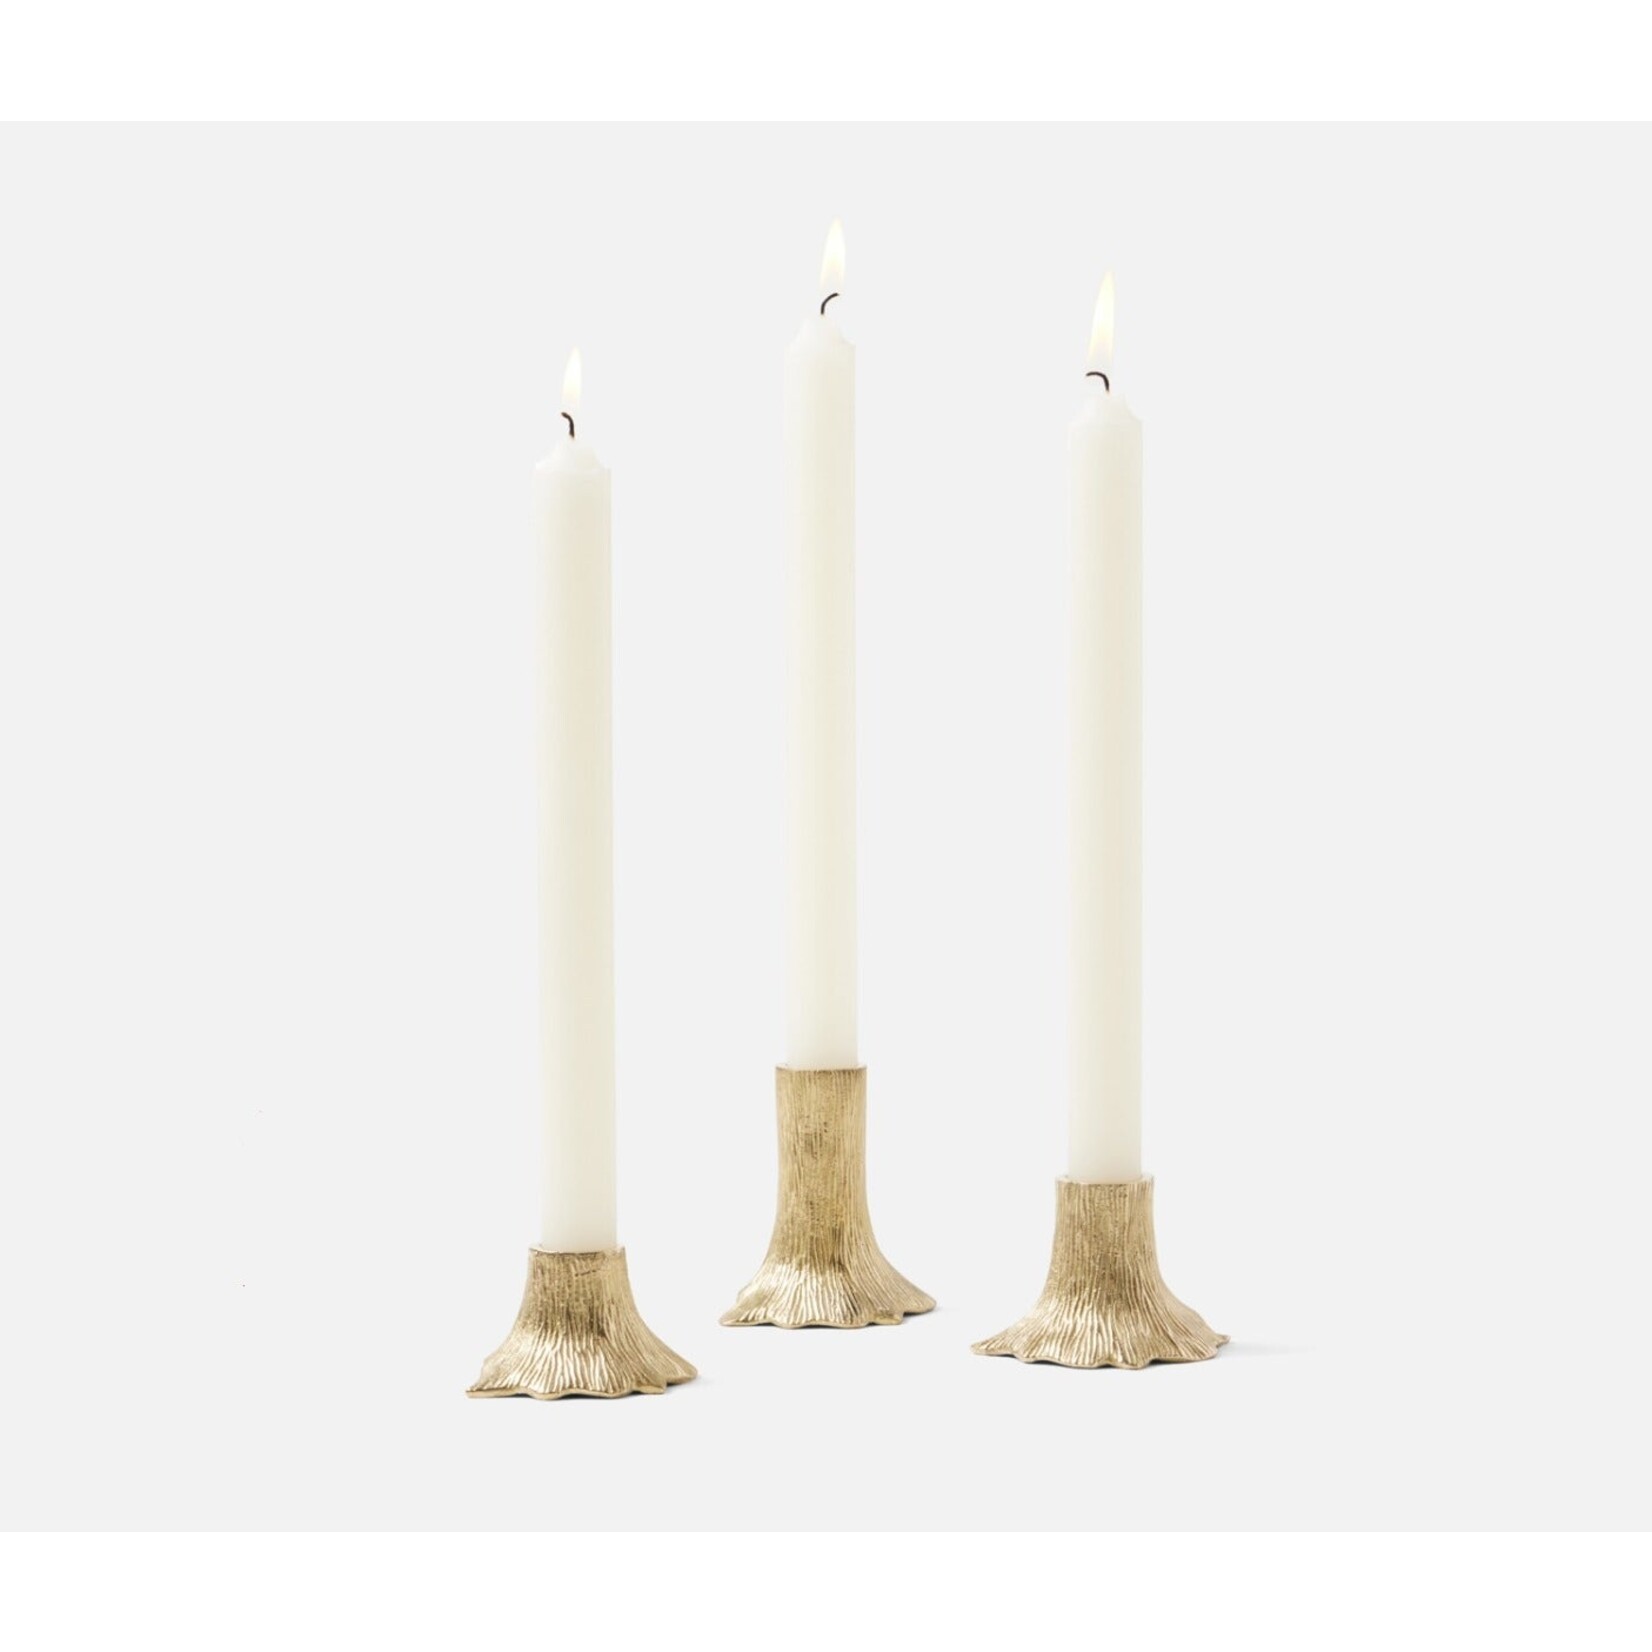 Blue Pheasant Griffin Gold Candle Holders (Set of 3)